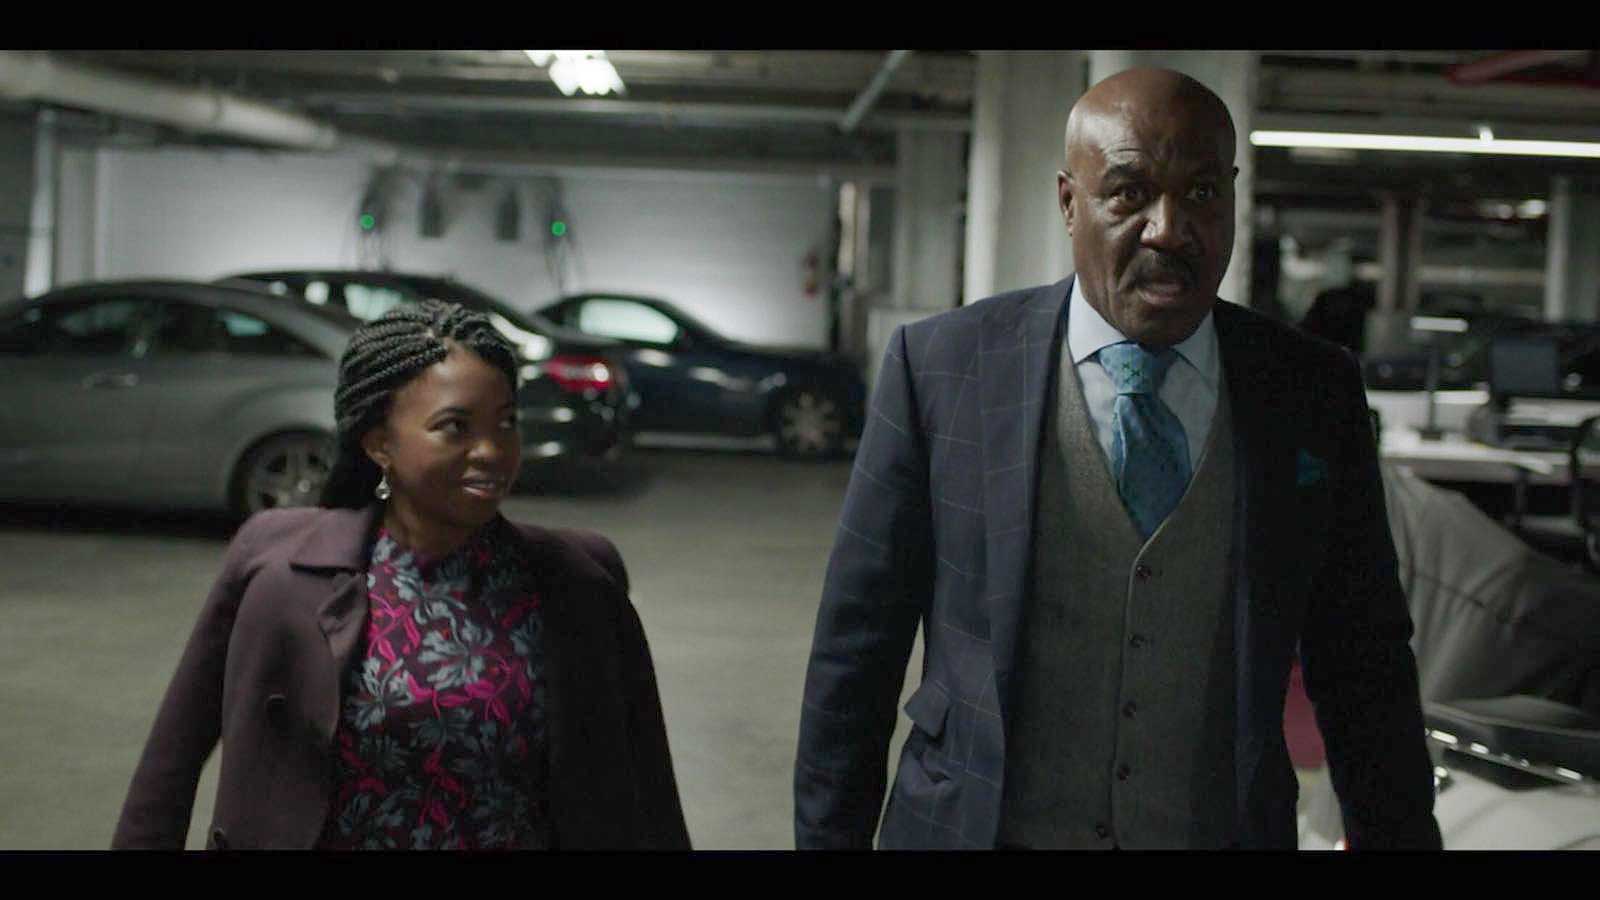 Phumzile Sitole Orange Is the New Black, Delroy Lindo New York Actress 